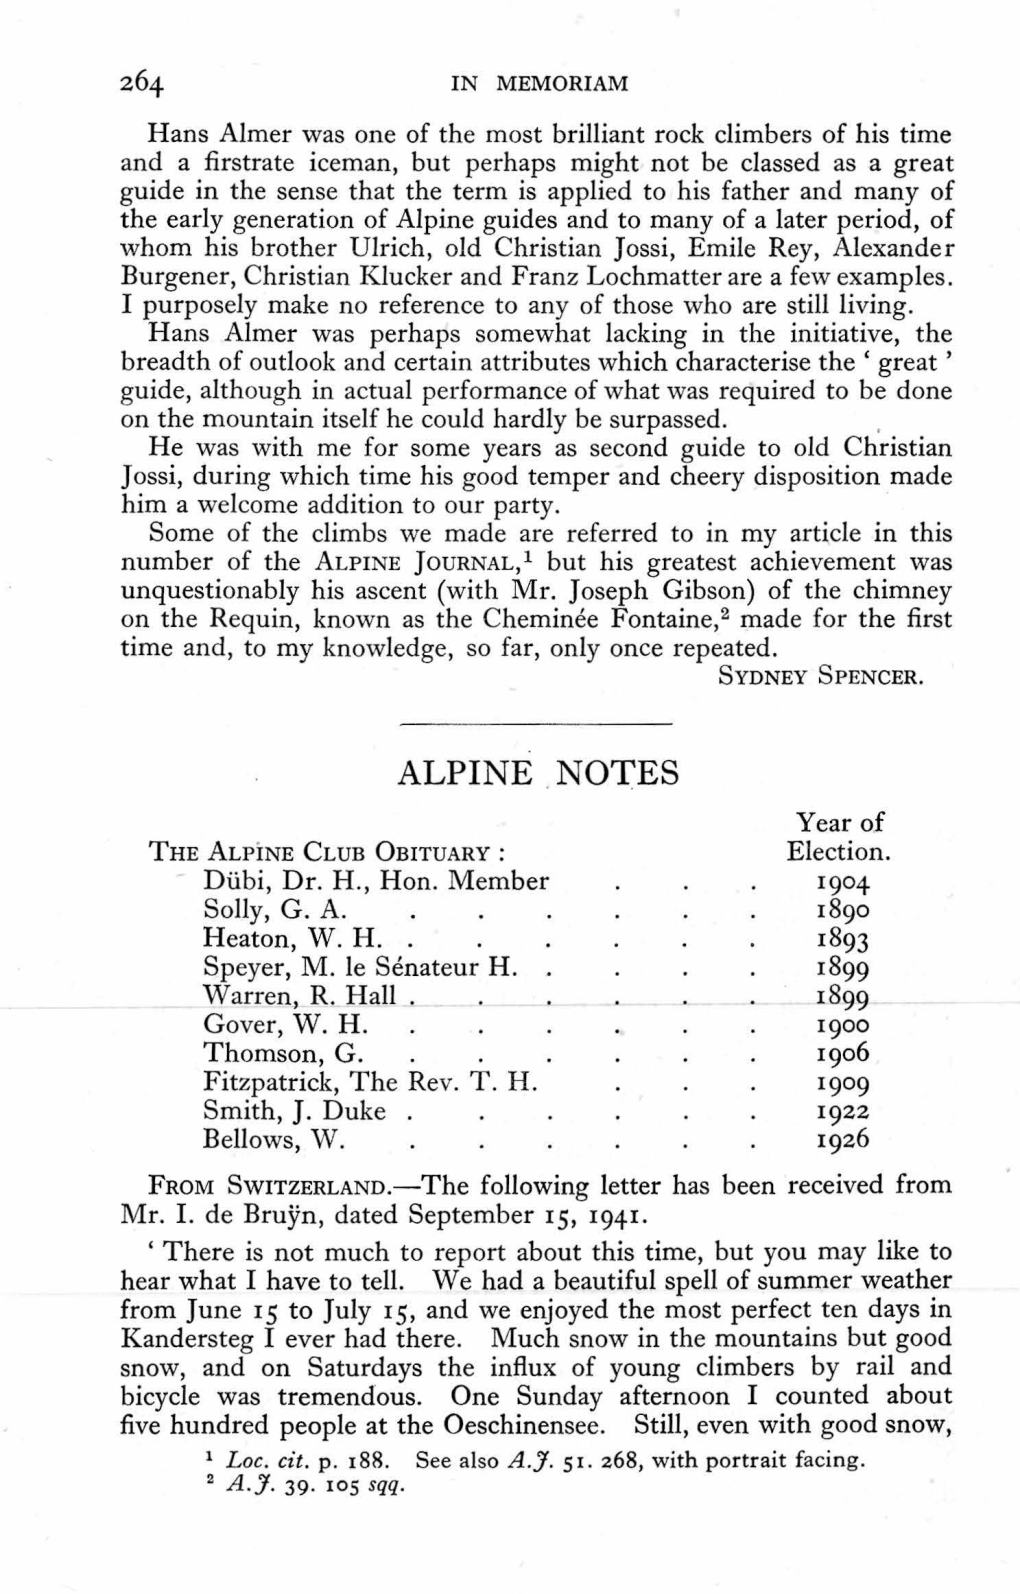 ALPINE NOTES • • Year of the ALPINE CLUB OBITUARY : Election